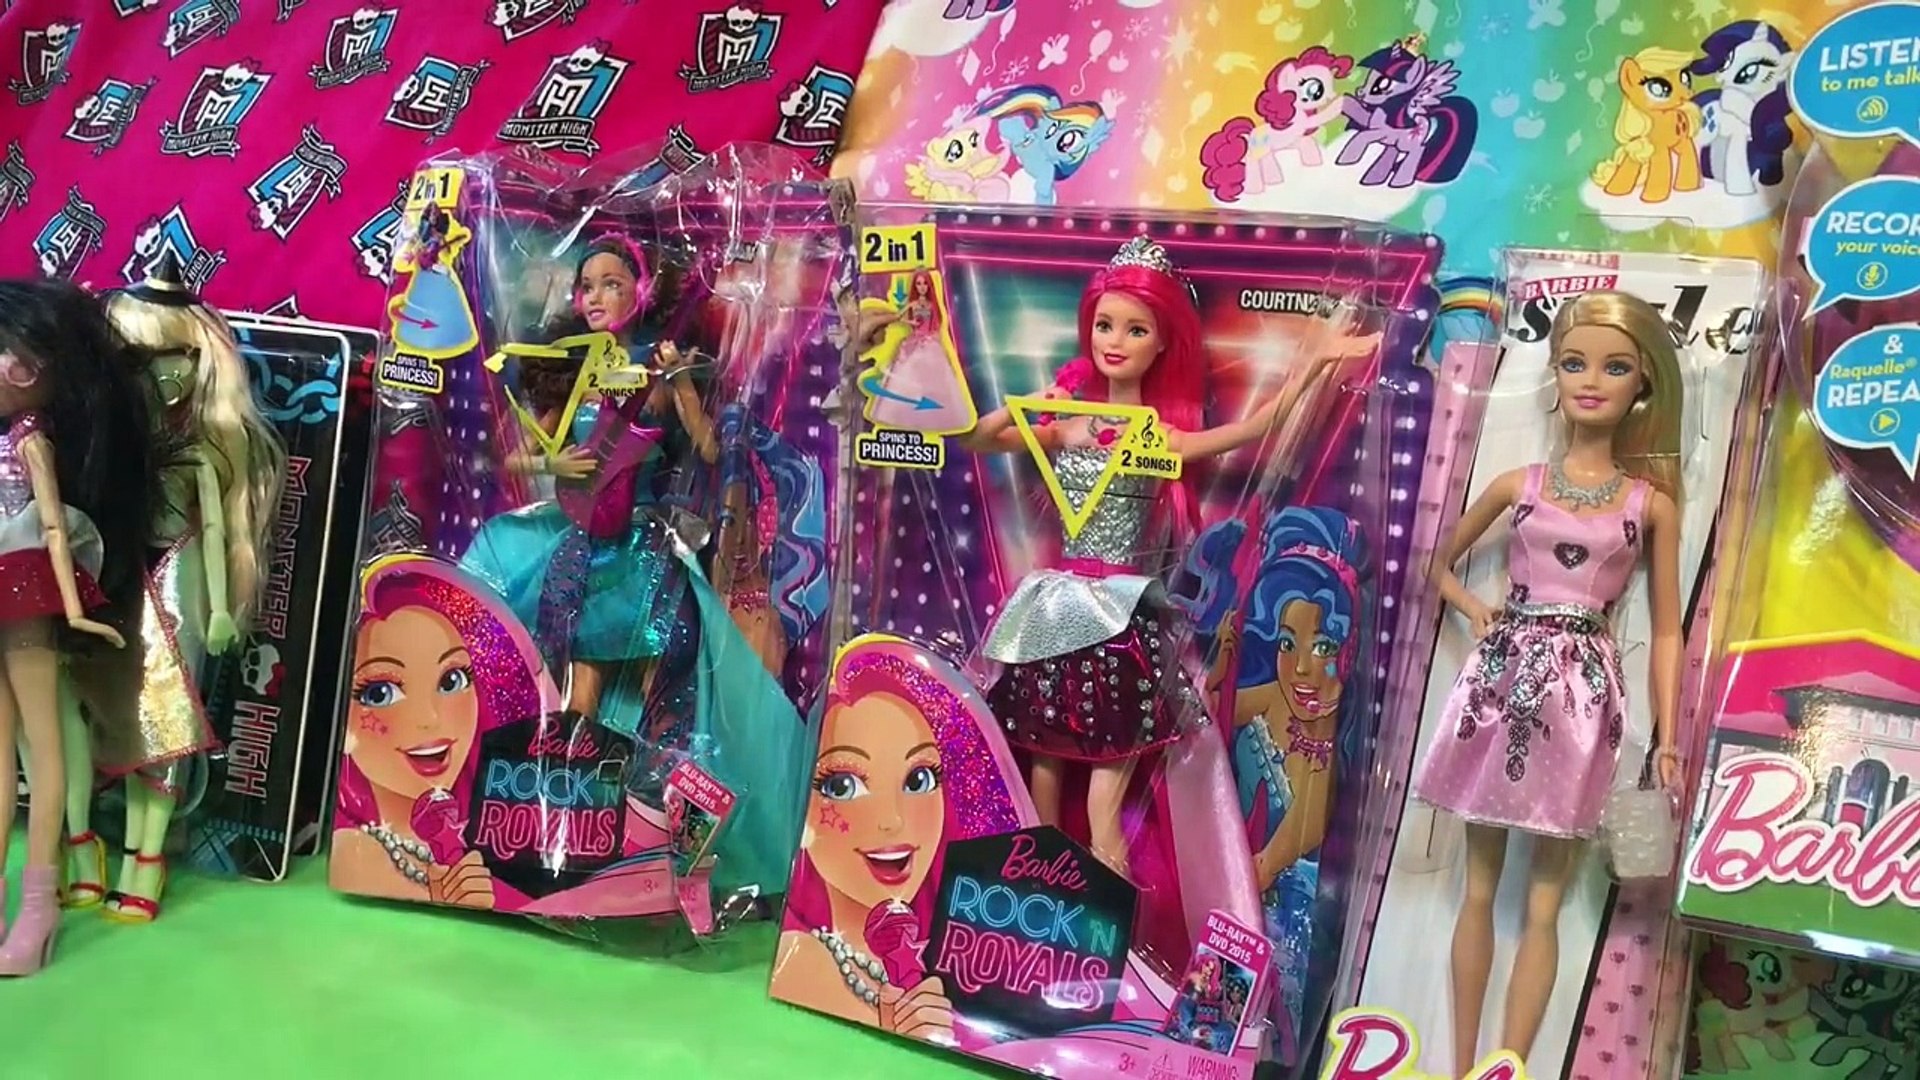 NEW Barbie Rock N Royals Princess Rockstar Courtney and Ericka Mattel  Review Unboxing | 2015 | 2015 - video Dailymotion